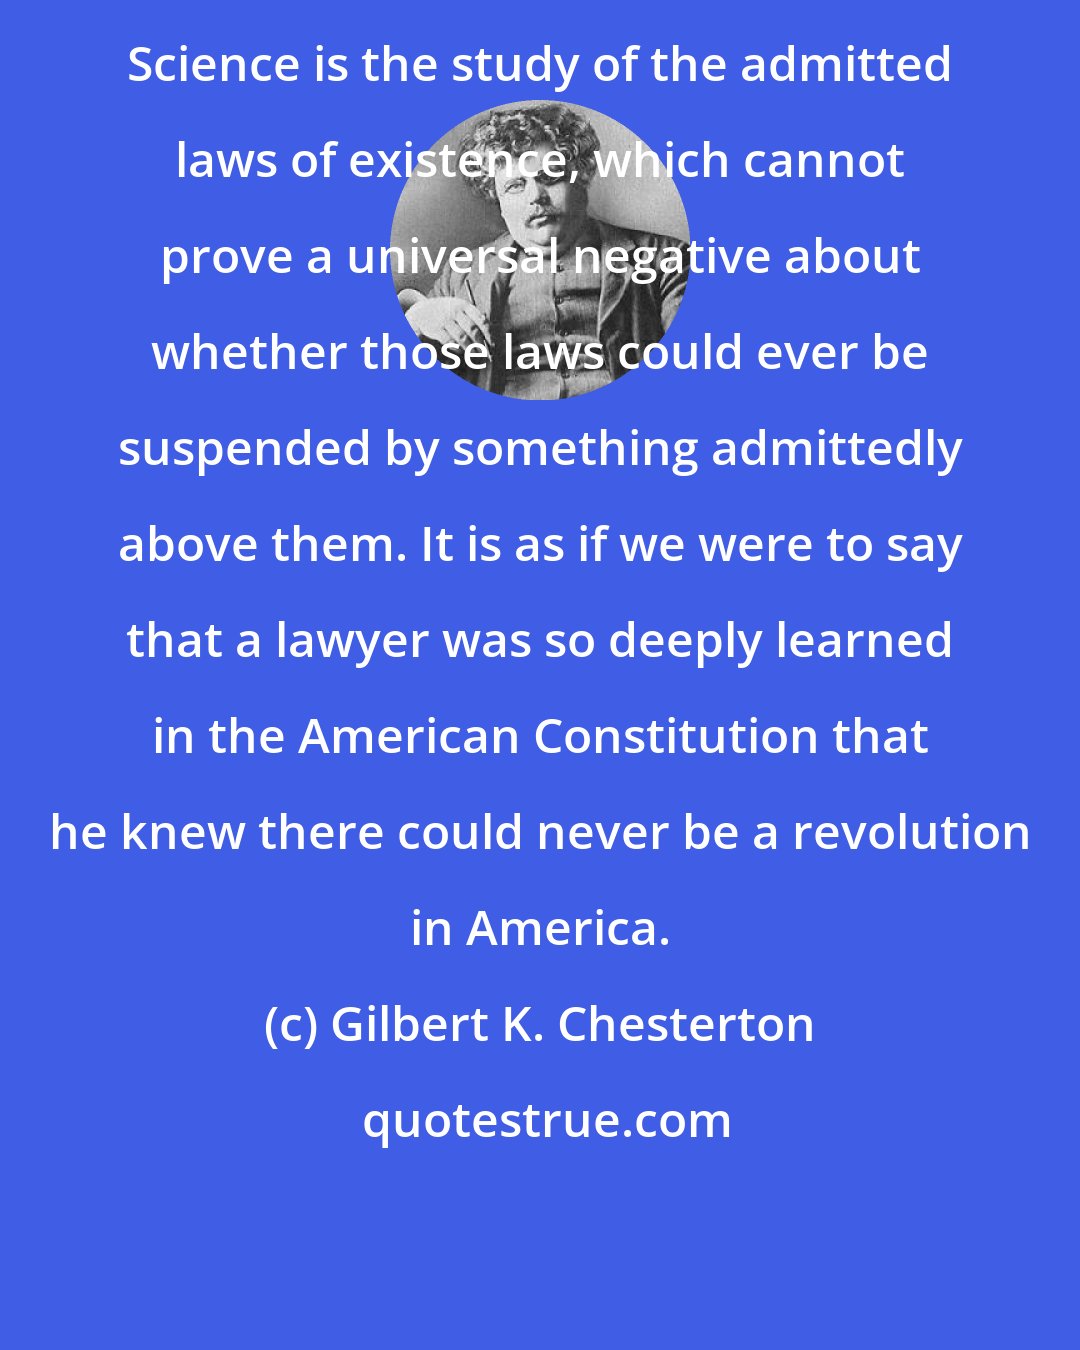 Gilbert K. Chesterton: Science is the study of the admitted laws of existence, which cannot prove a universal negative about whether those laws could ever be suspended by something admittedly above them. It is as if we were to say that a lawyer was so deeply learned in the American Constitution that he knew there could never be a revolution in America.